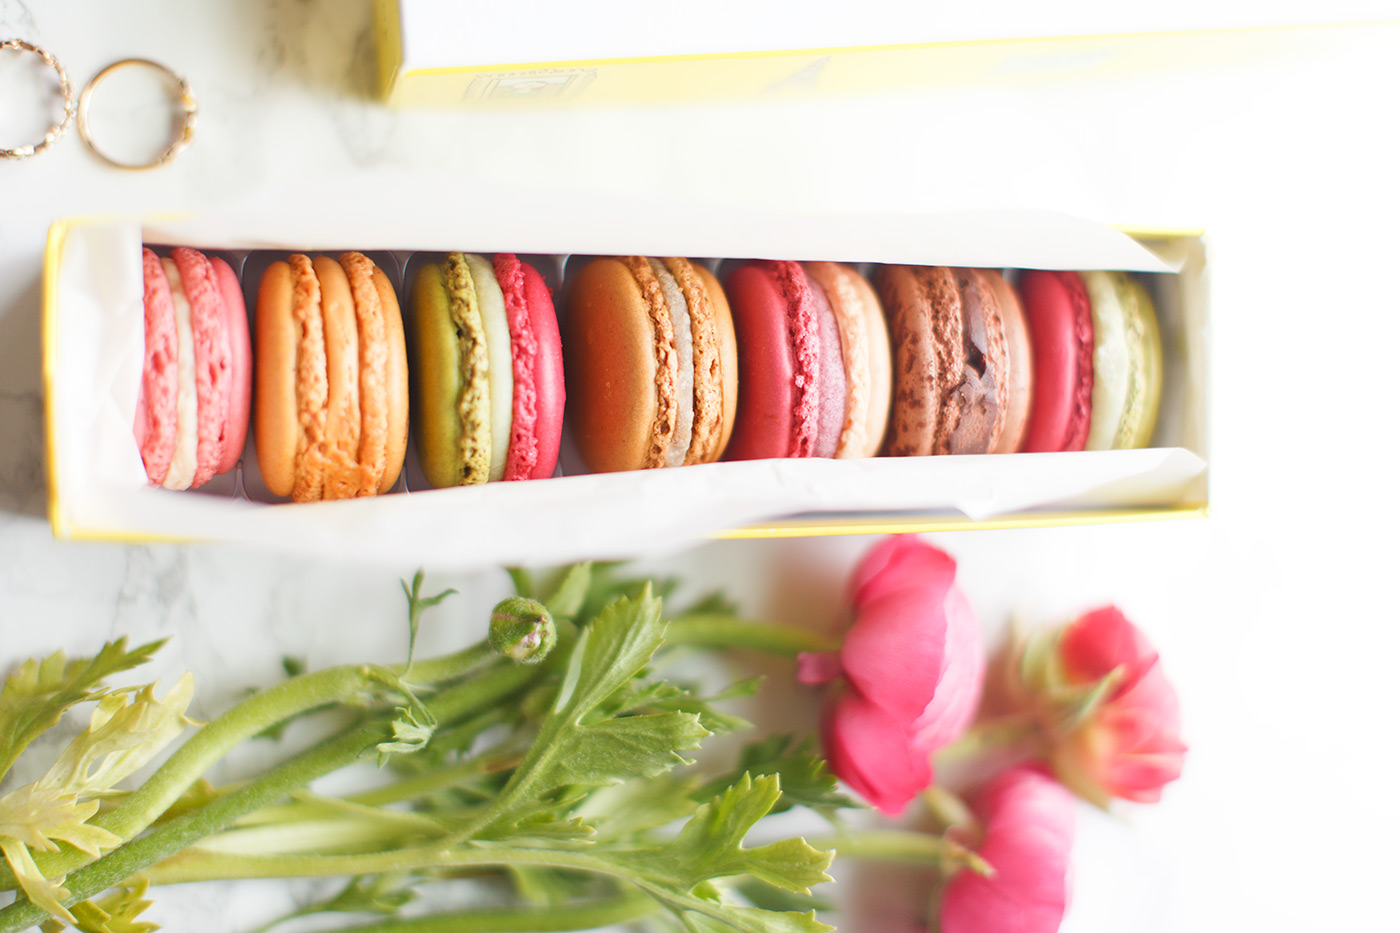 Pierre Herme Macarons for National Dessert day by Armenyl.com